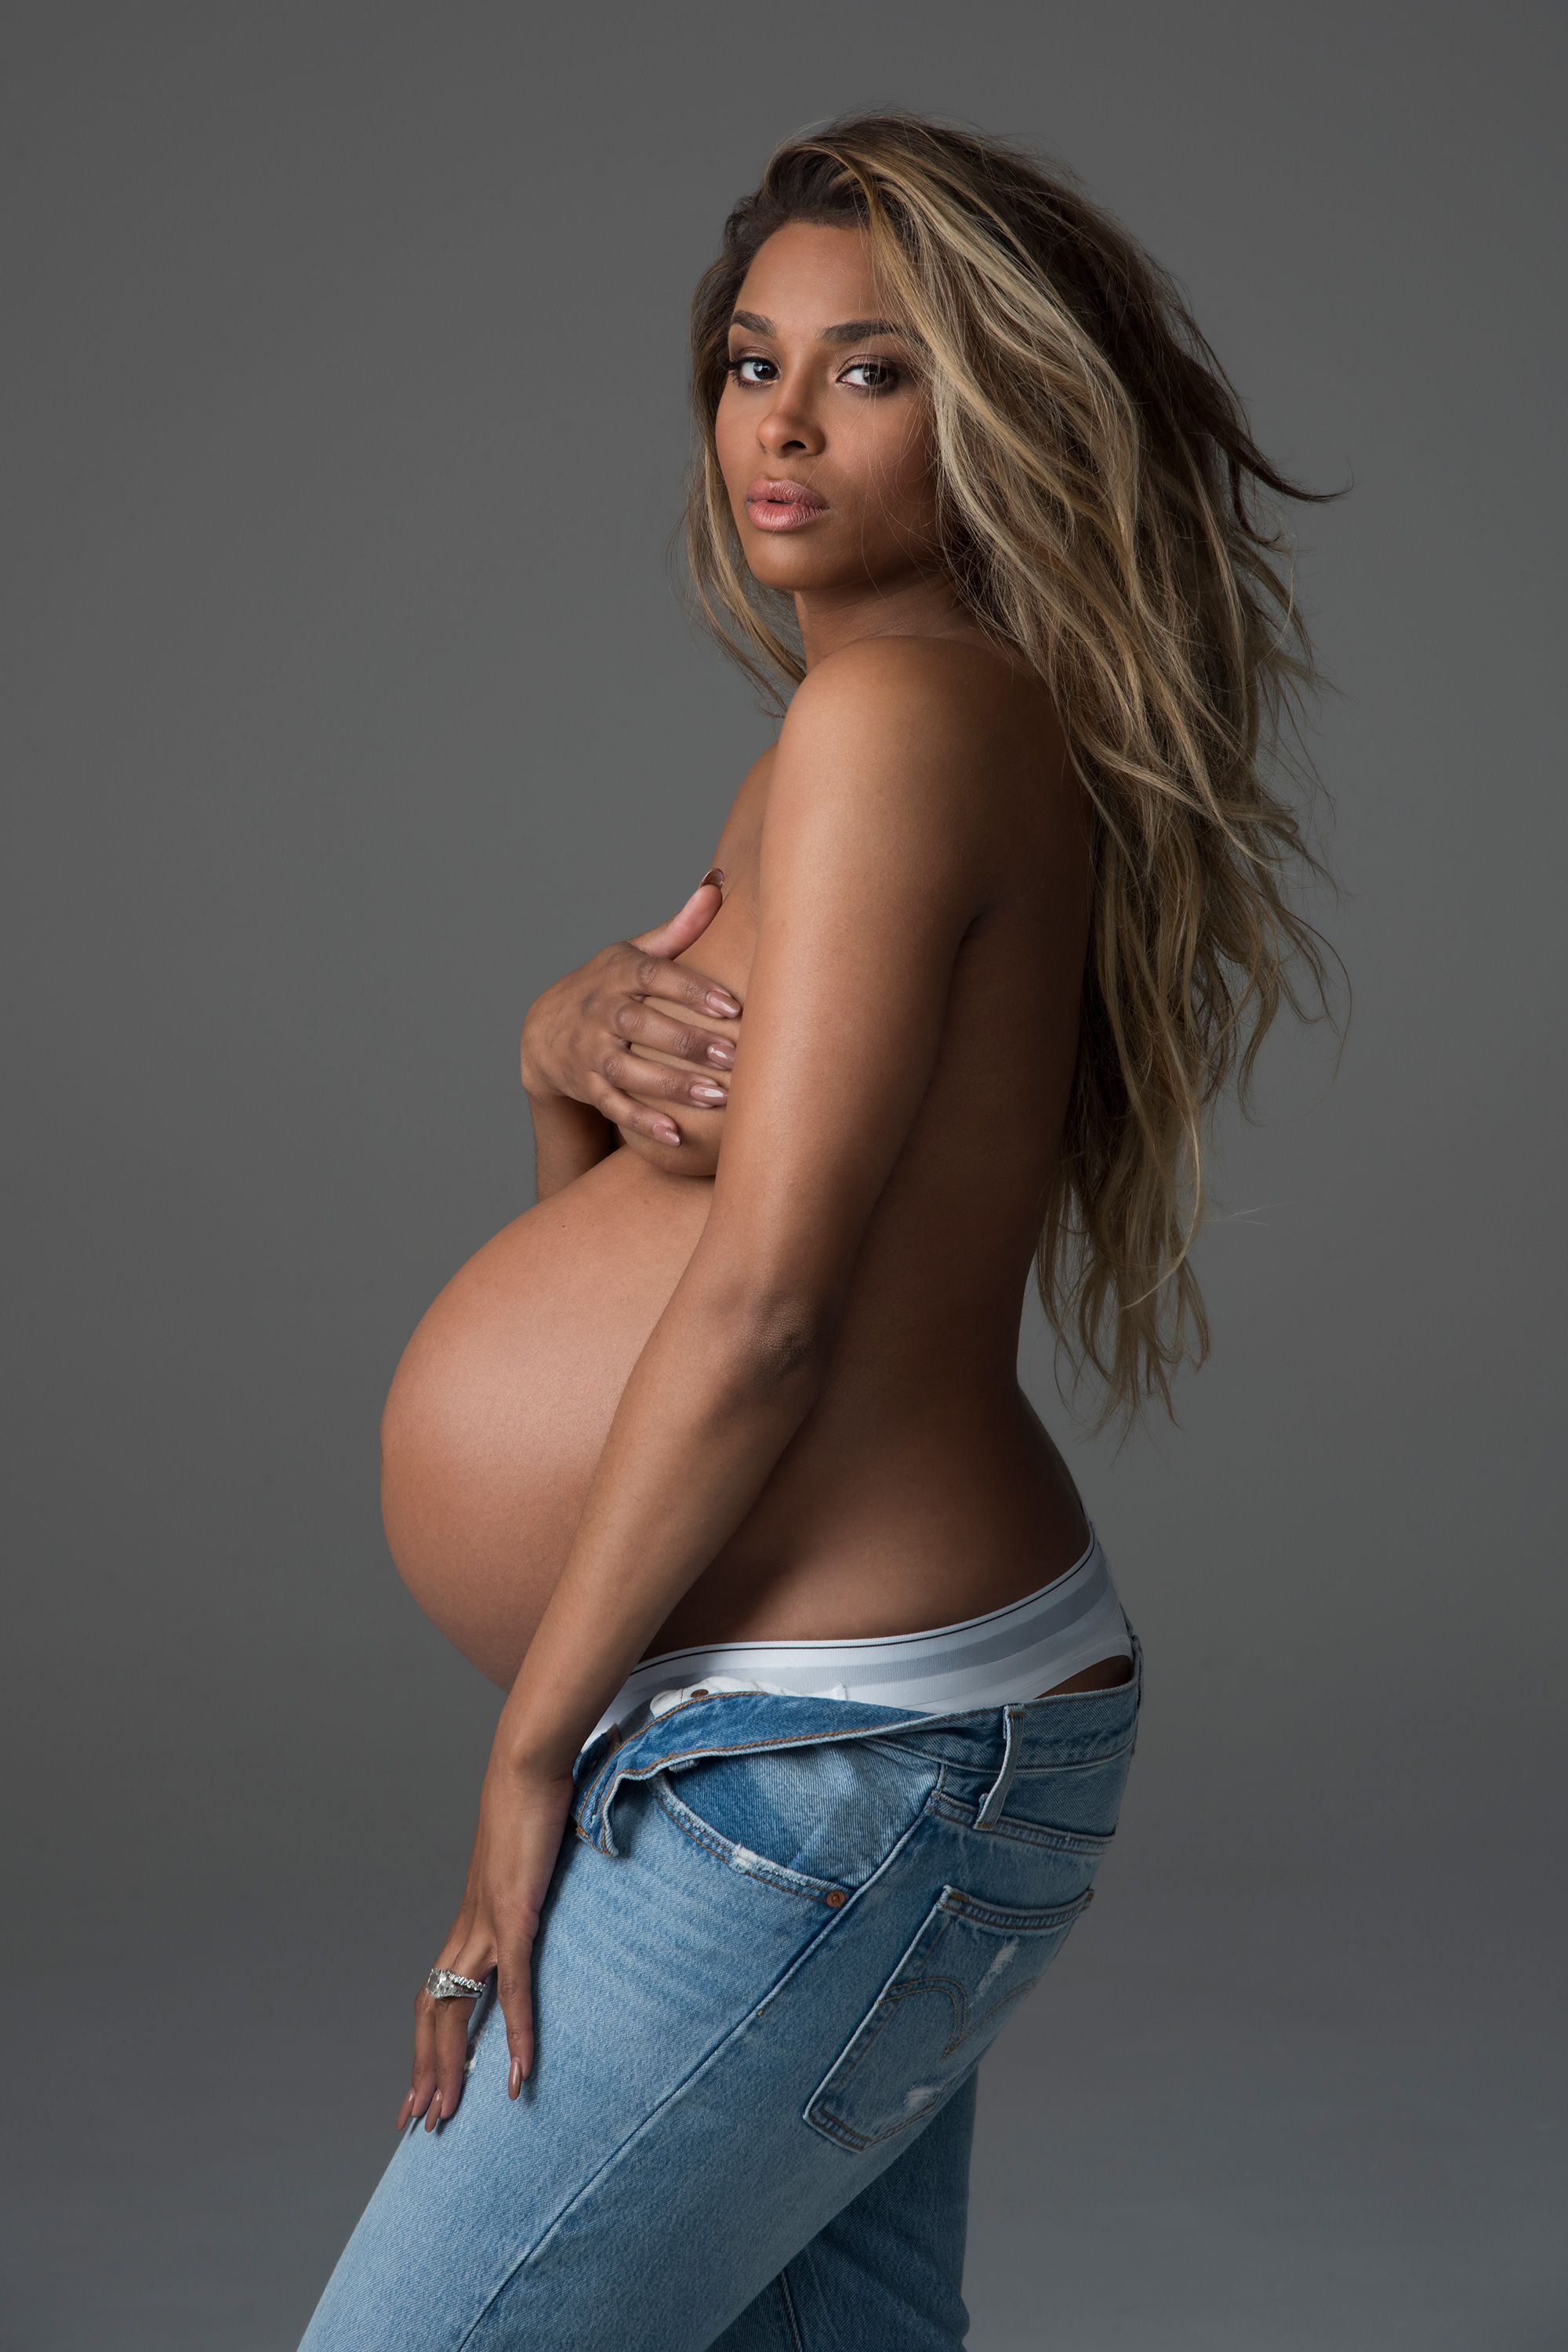 Ciara Opens Up About Her Pregnancy